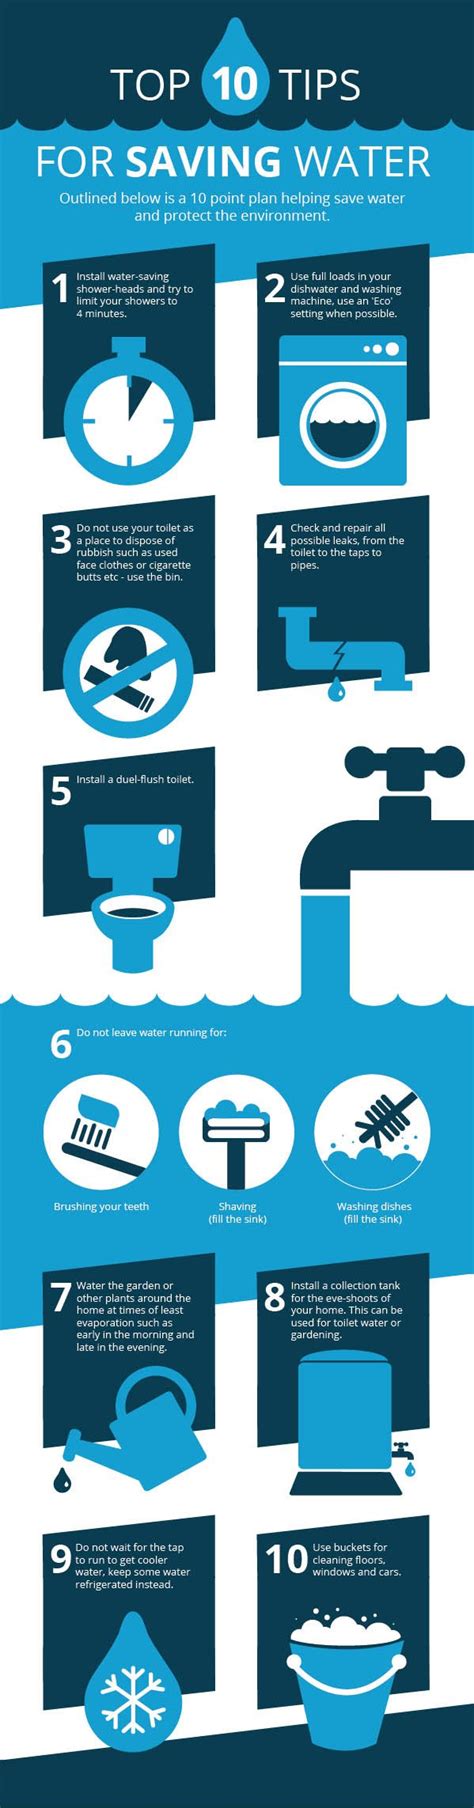 How To Save Water Images Top 10 Ways To Save Water In The Uae Images